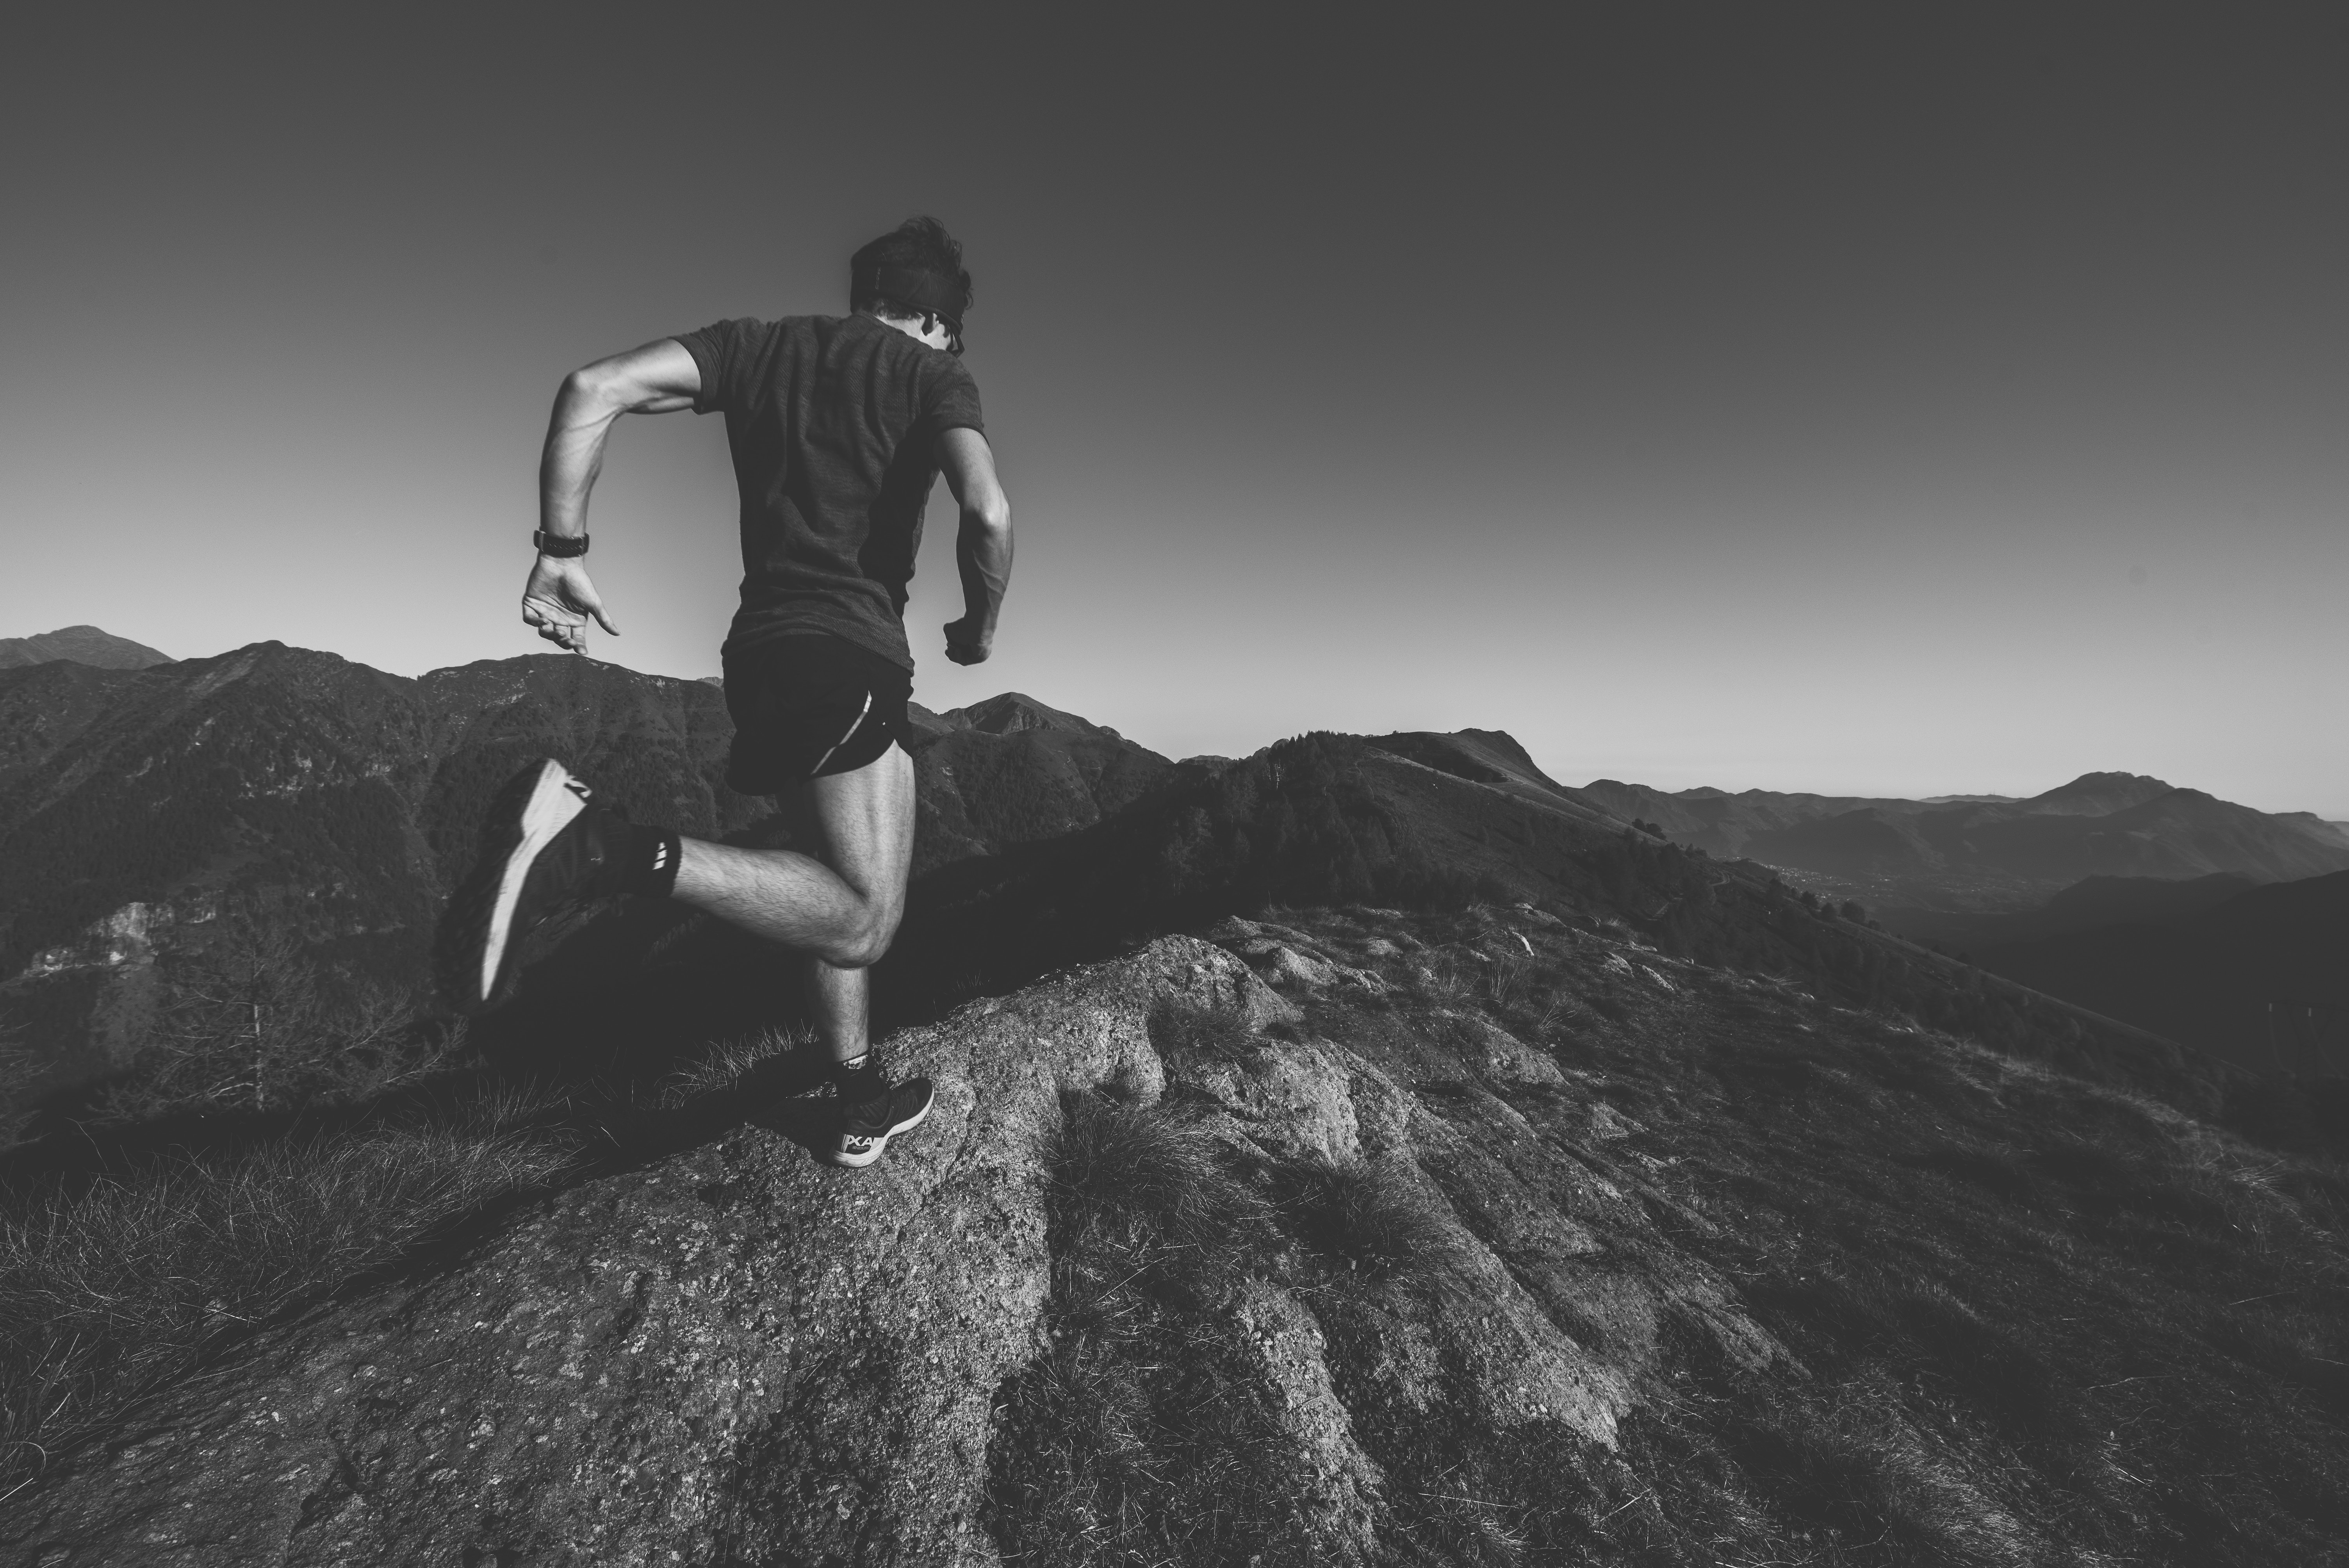 Cool Backgrounds chb, mountains, bw, athlete Running